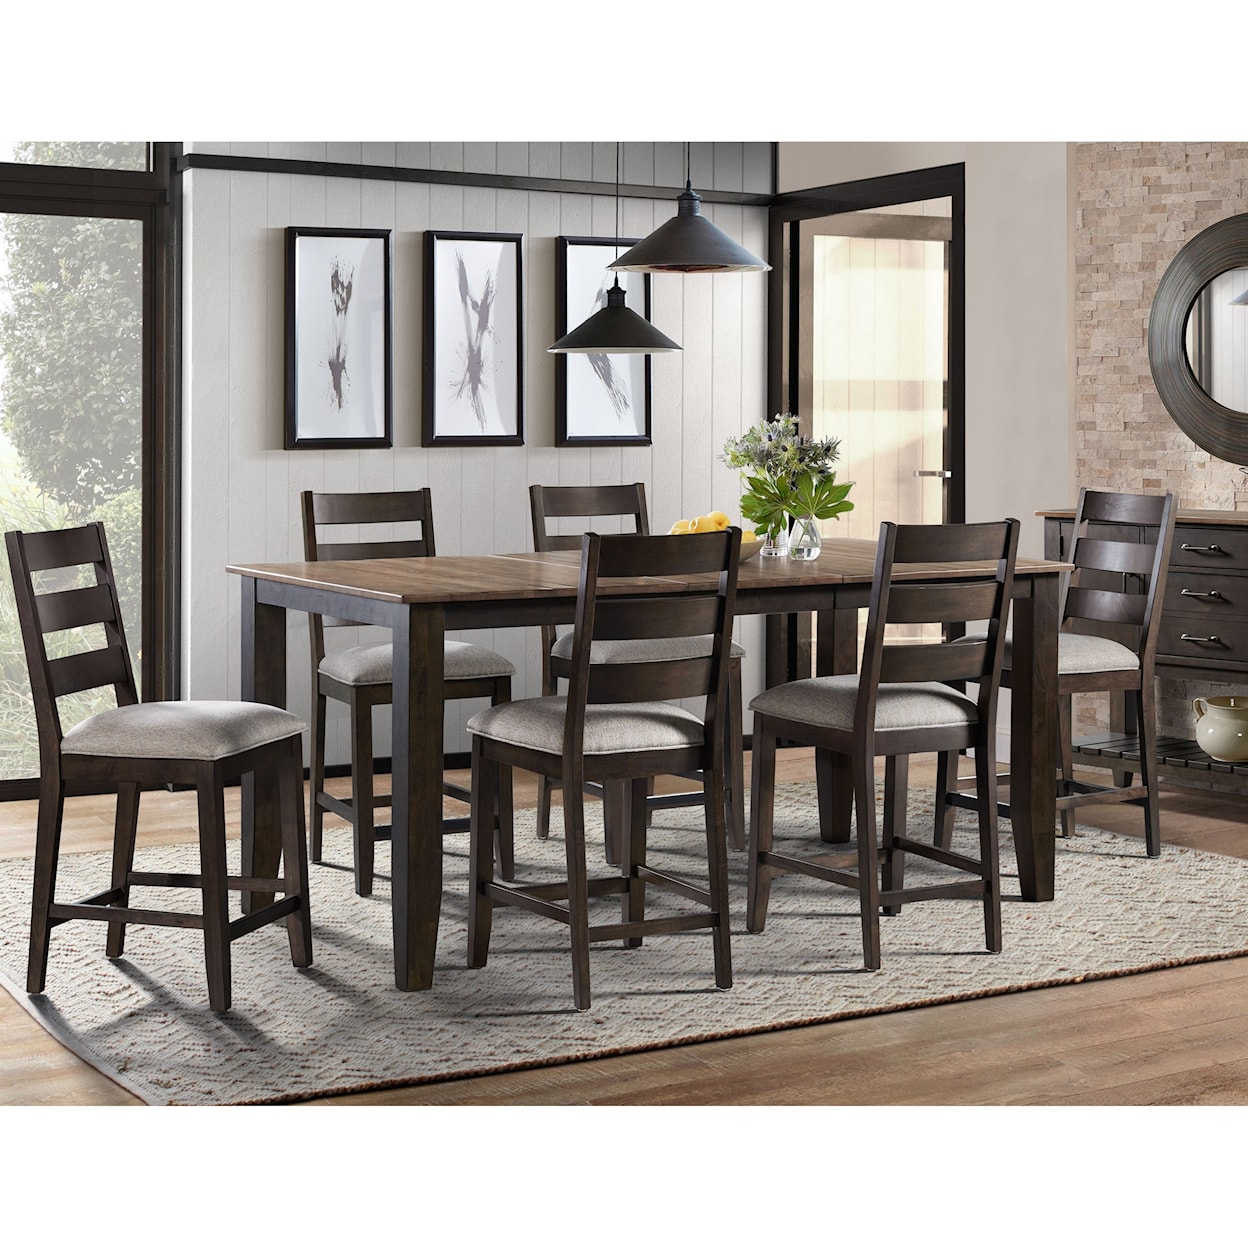 Intercon 31217 7-Piece Counter Height Table and Chair Set